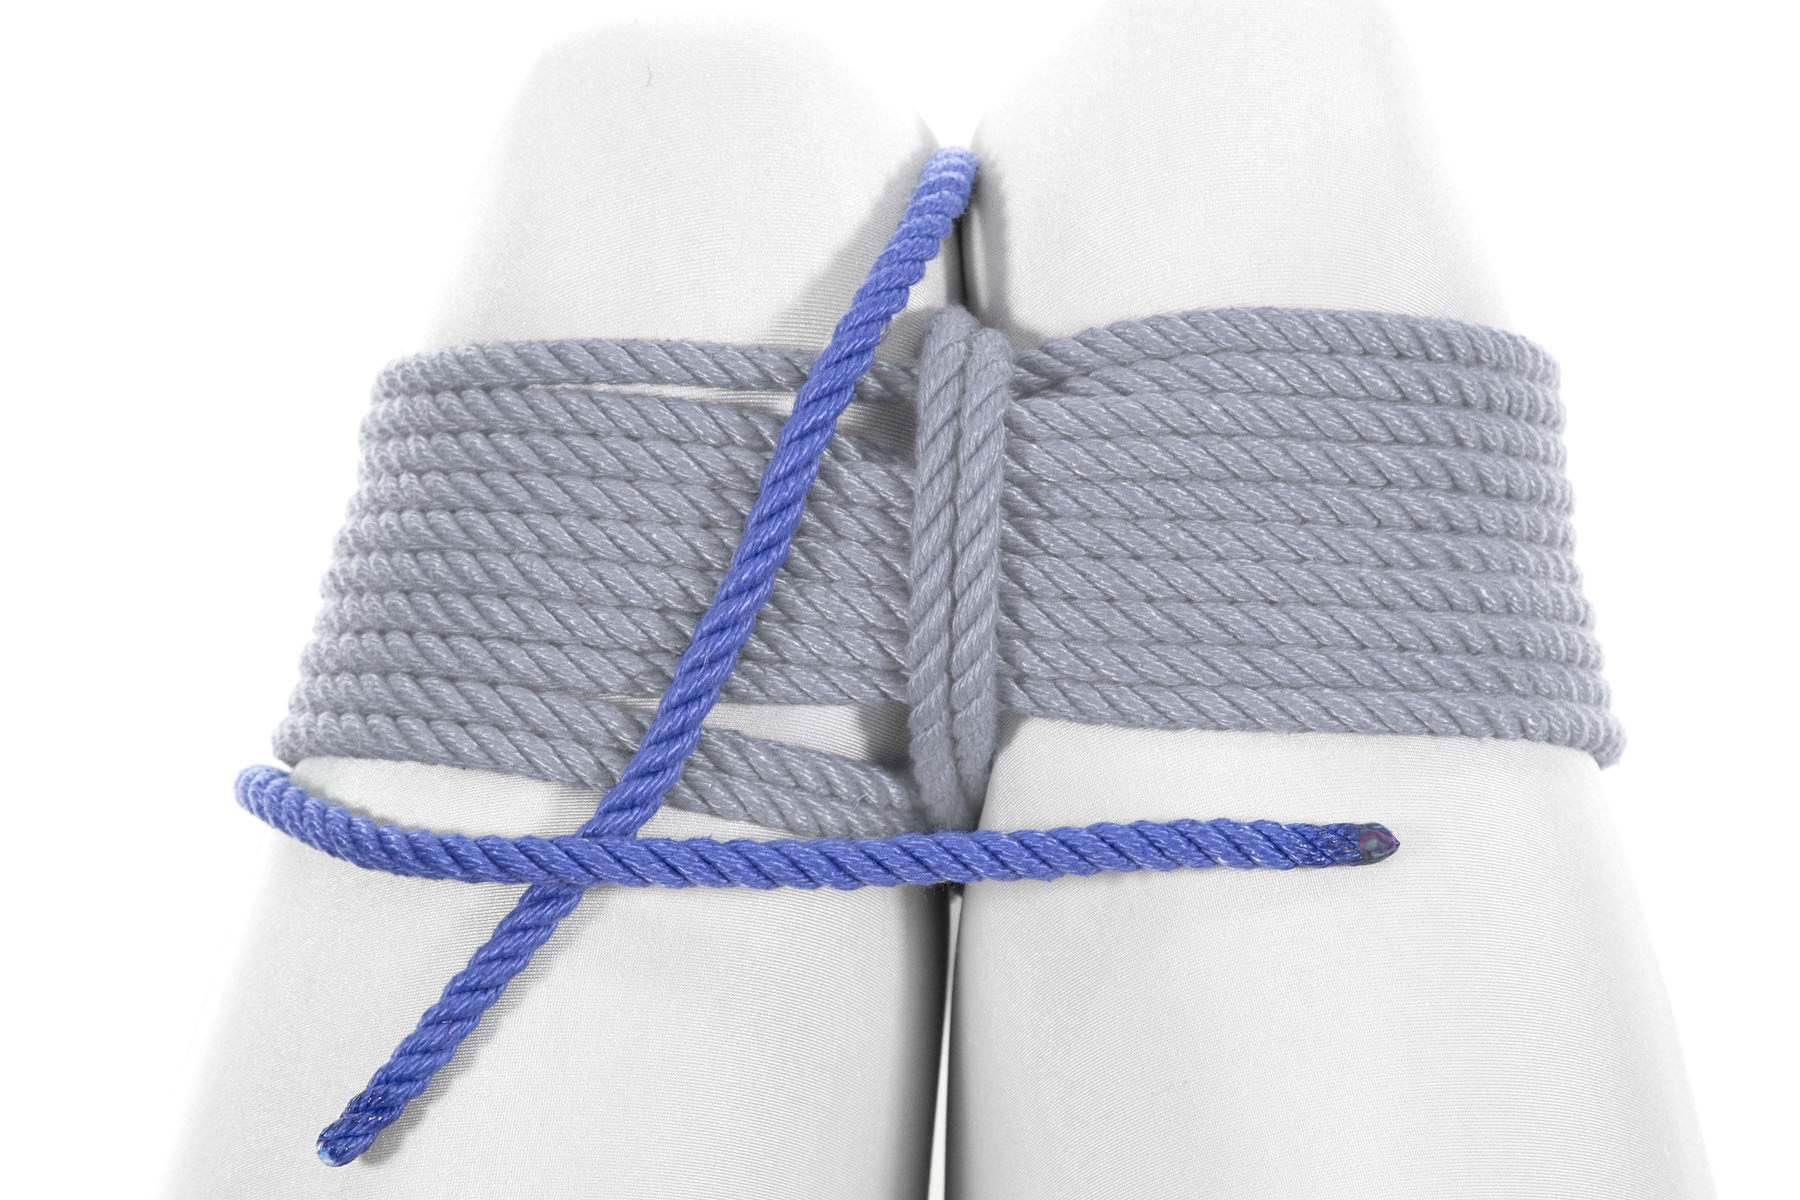 The two ends of the rope have been separated. One comes up between the knees, right where it did previously. The other end has gone clockwise around the left leg. The two ends cross each other on top of the left leg.